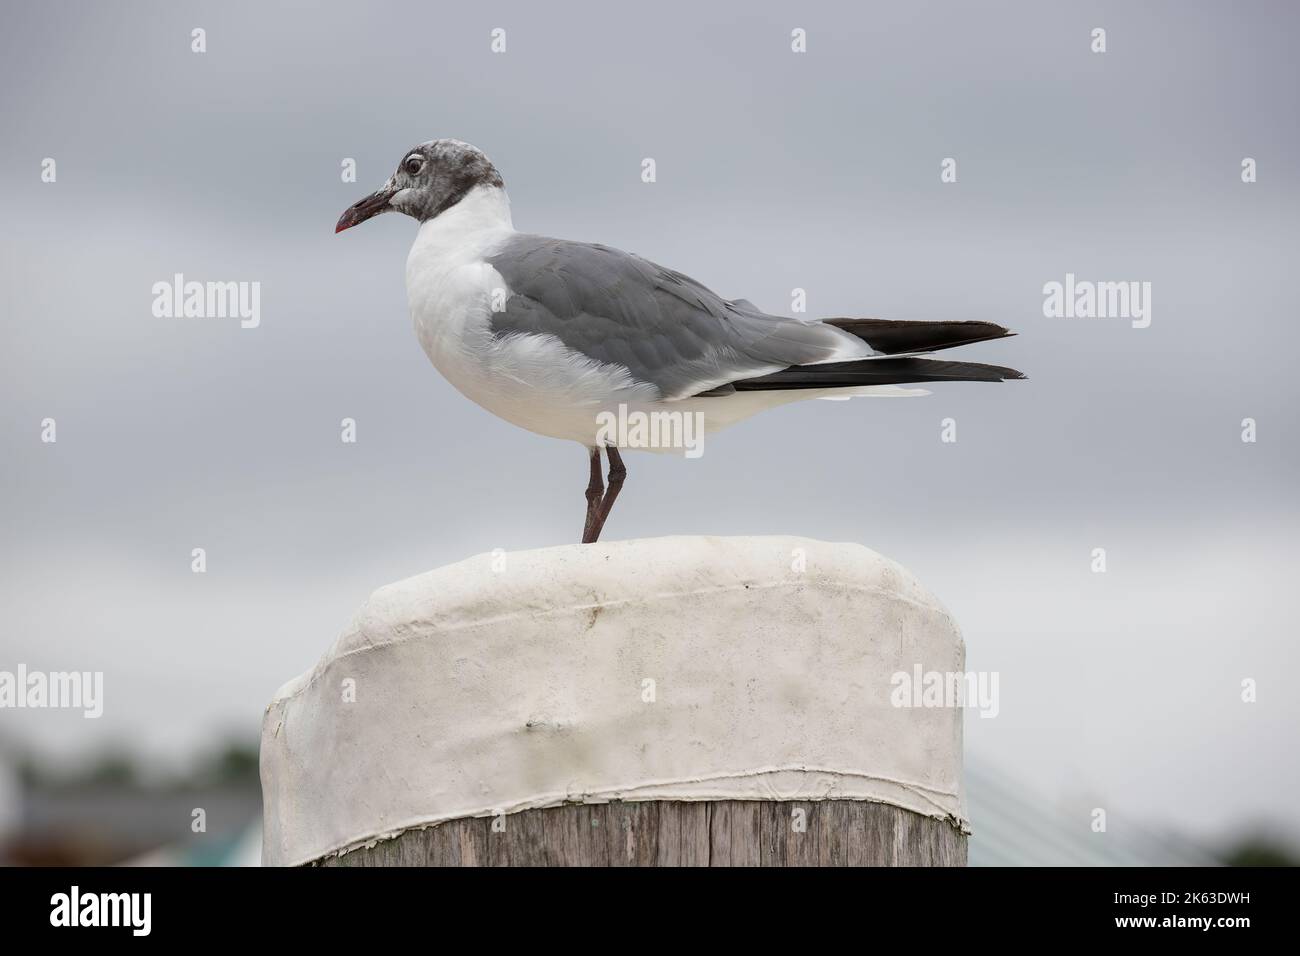 A nearly grown seagul perches on a peir post under cloudy skies Stock Photo